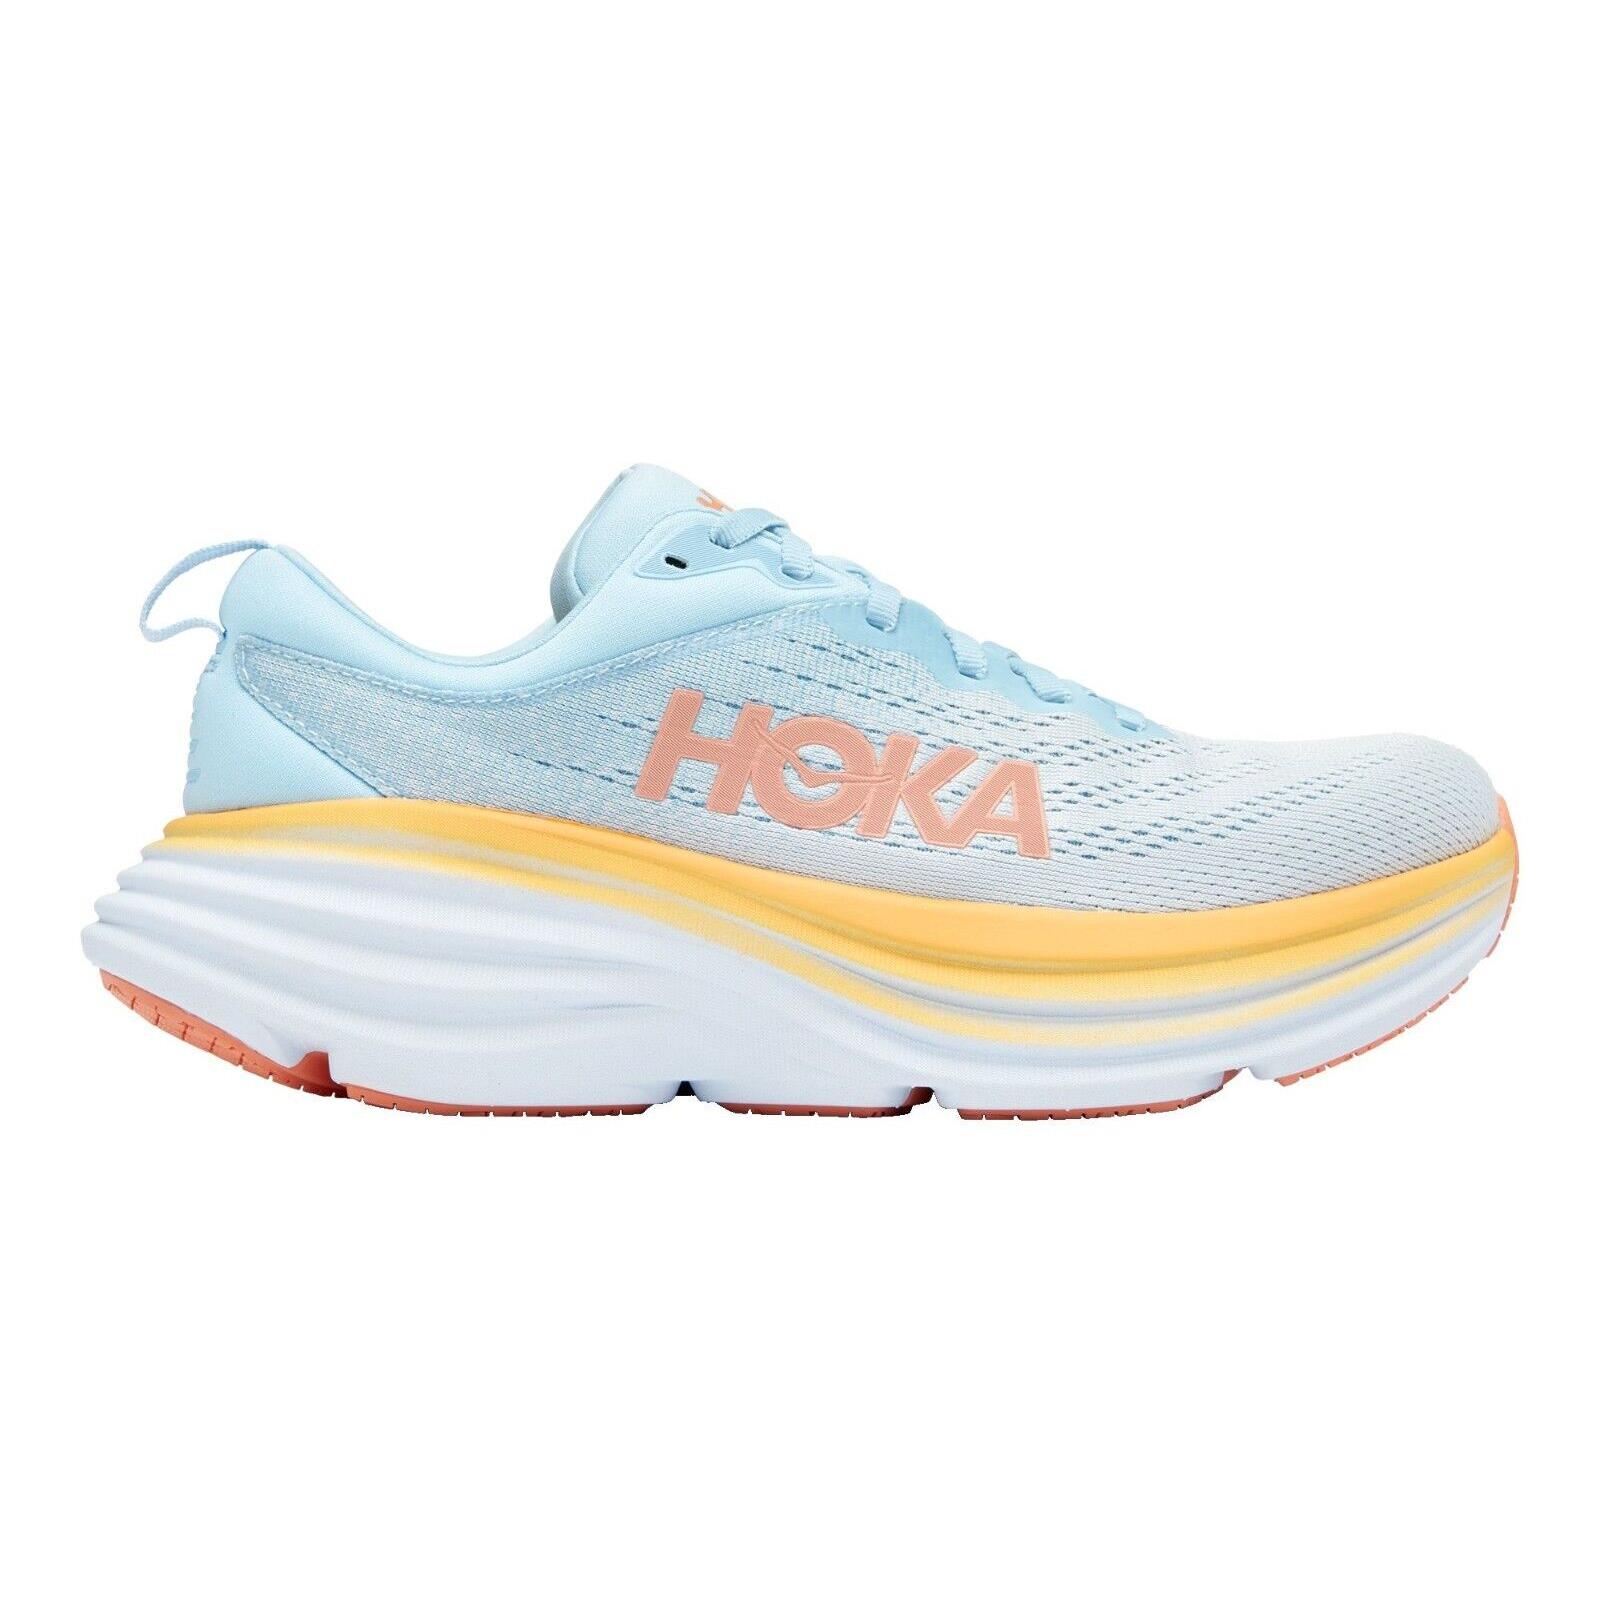 Hoka One One Bondi 8 Running Shoes Women`s US Sizes 6-12 Colors Available Summer Song / Country Air